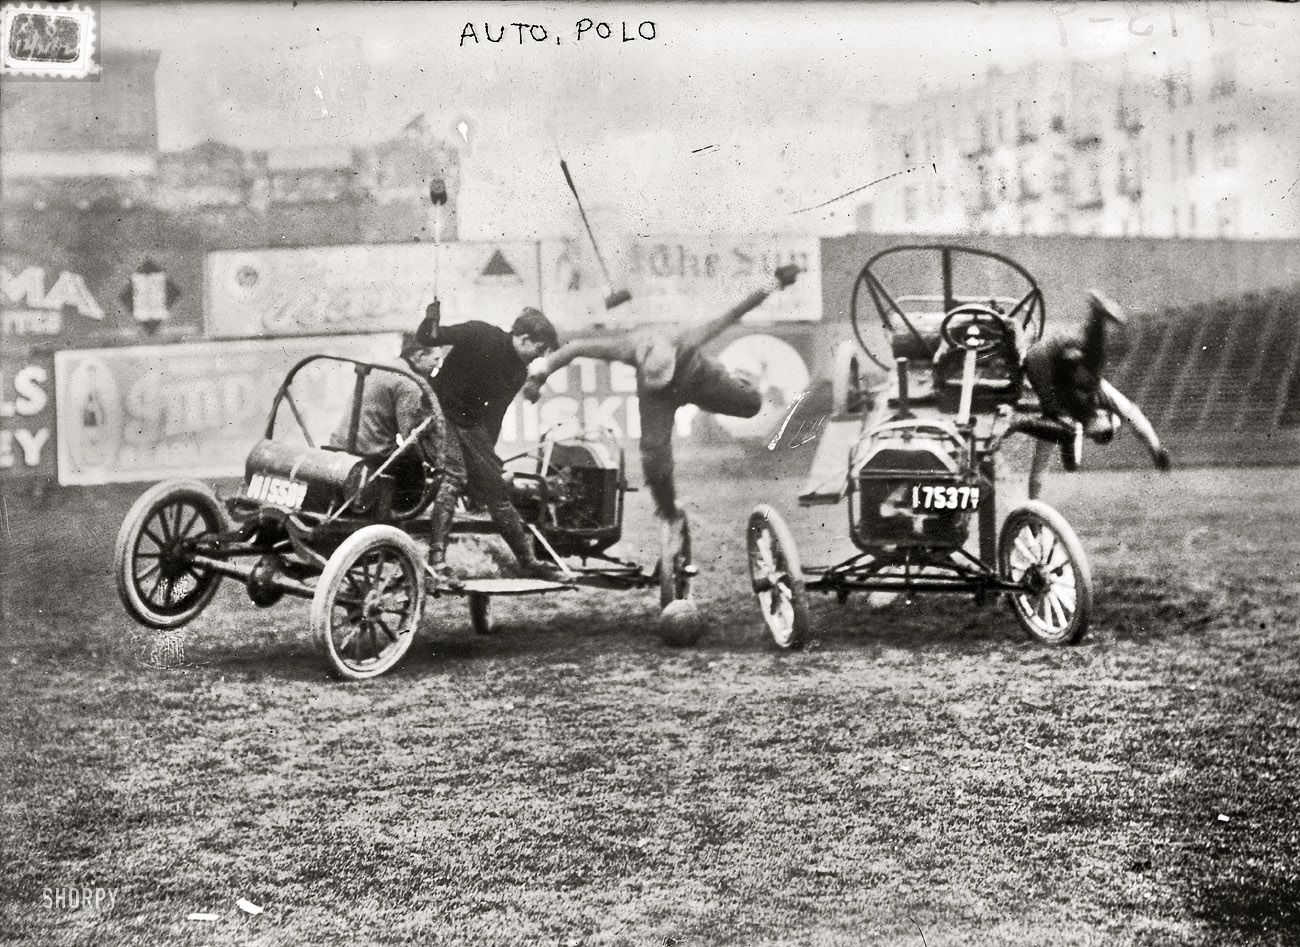 December 1912. "Auto polo," somewhere in New York. It looks a little risky to me. 5x7 glass negative, George Grantham Bain Collection. View full size.